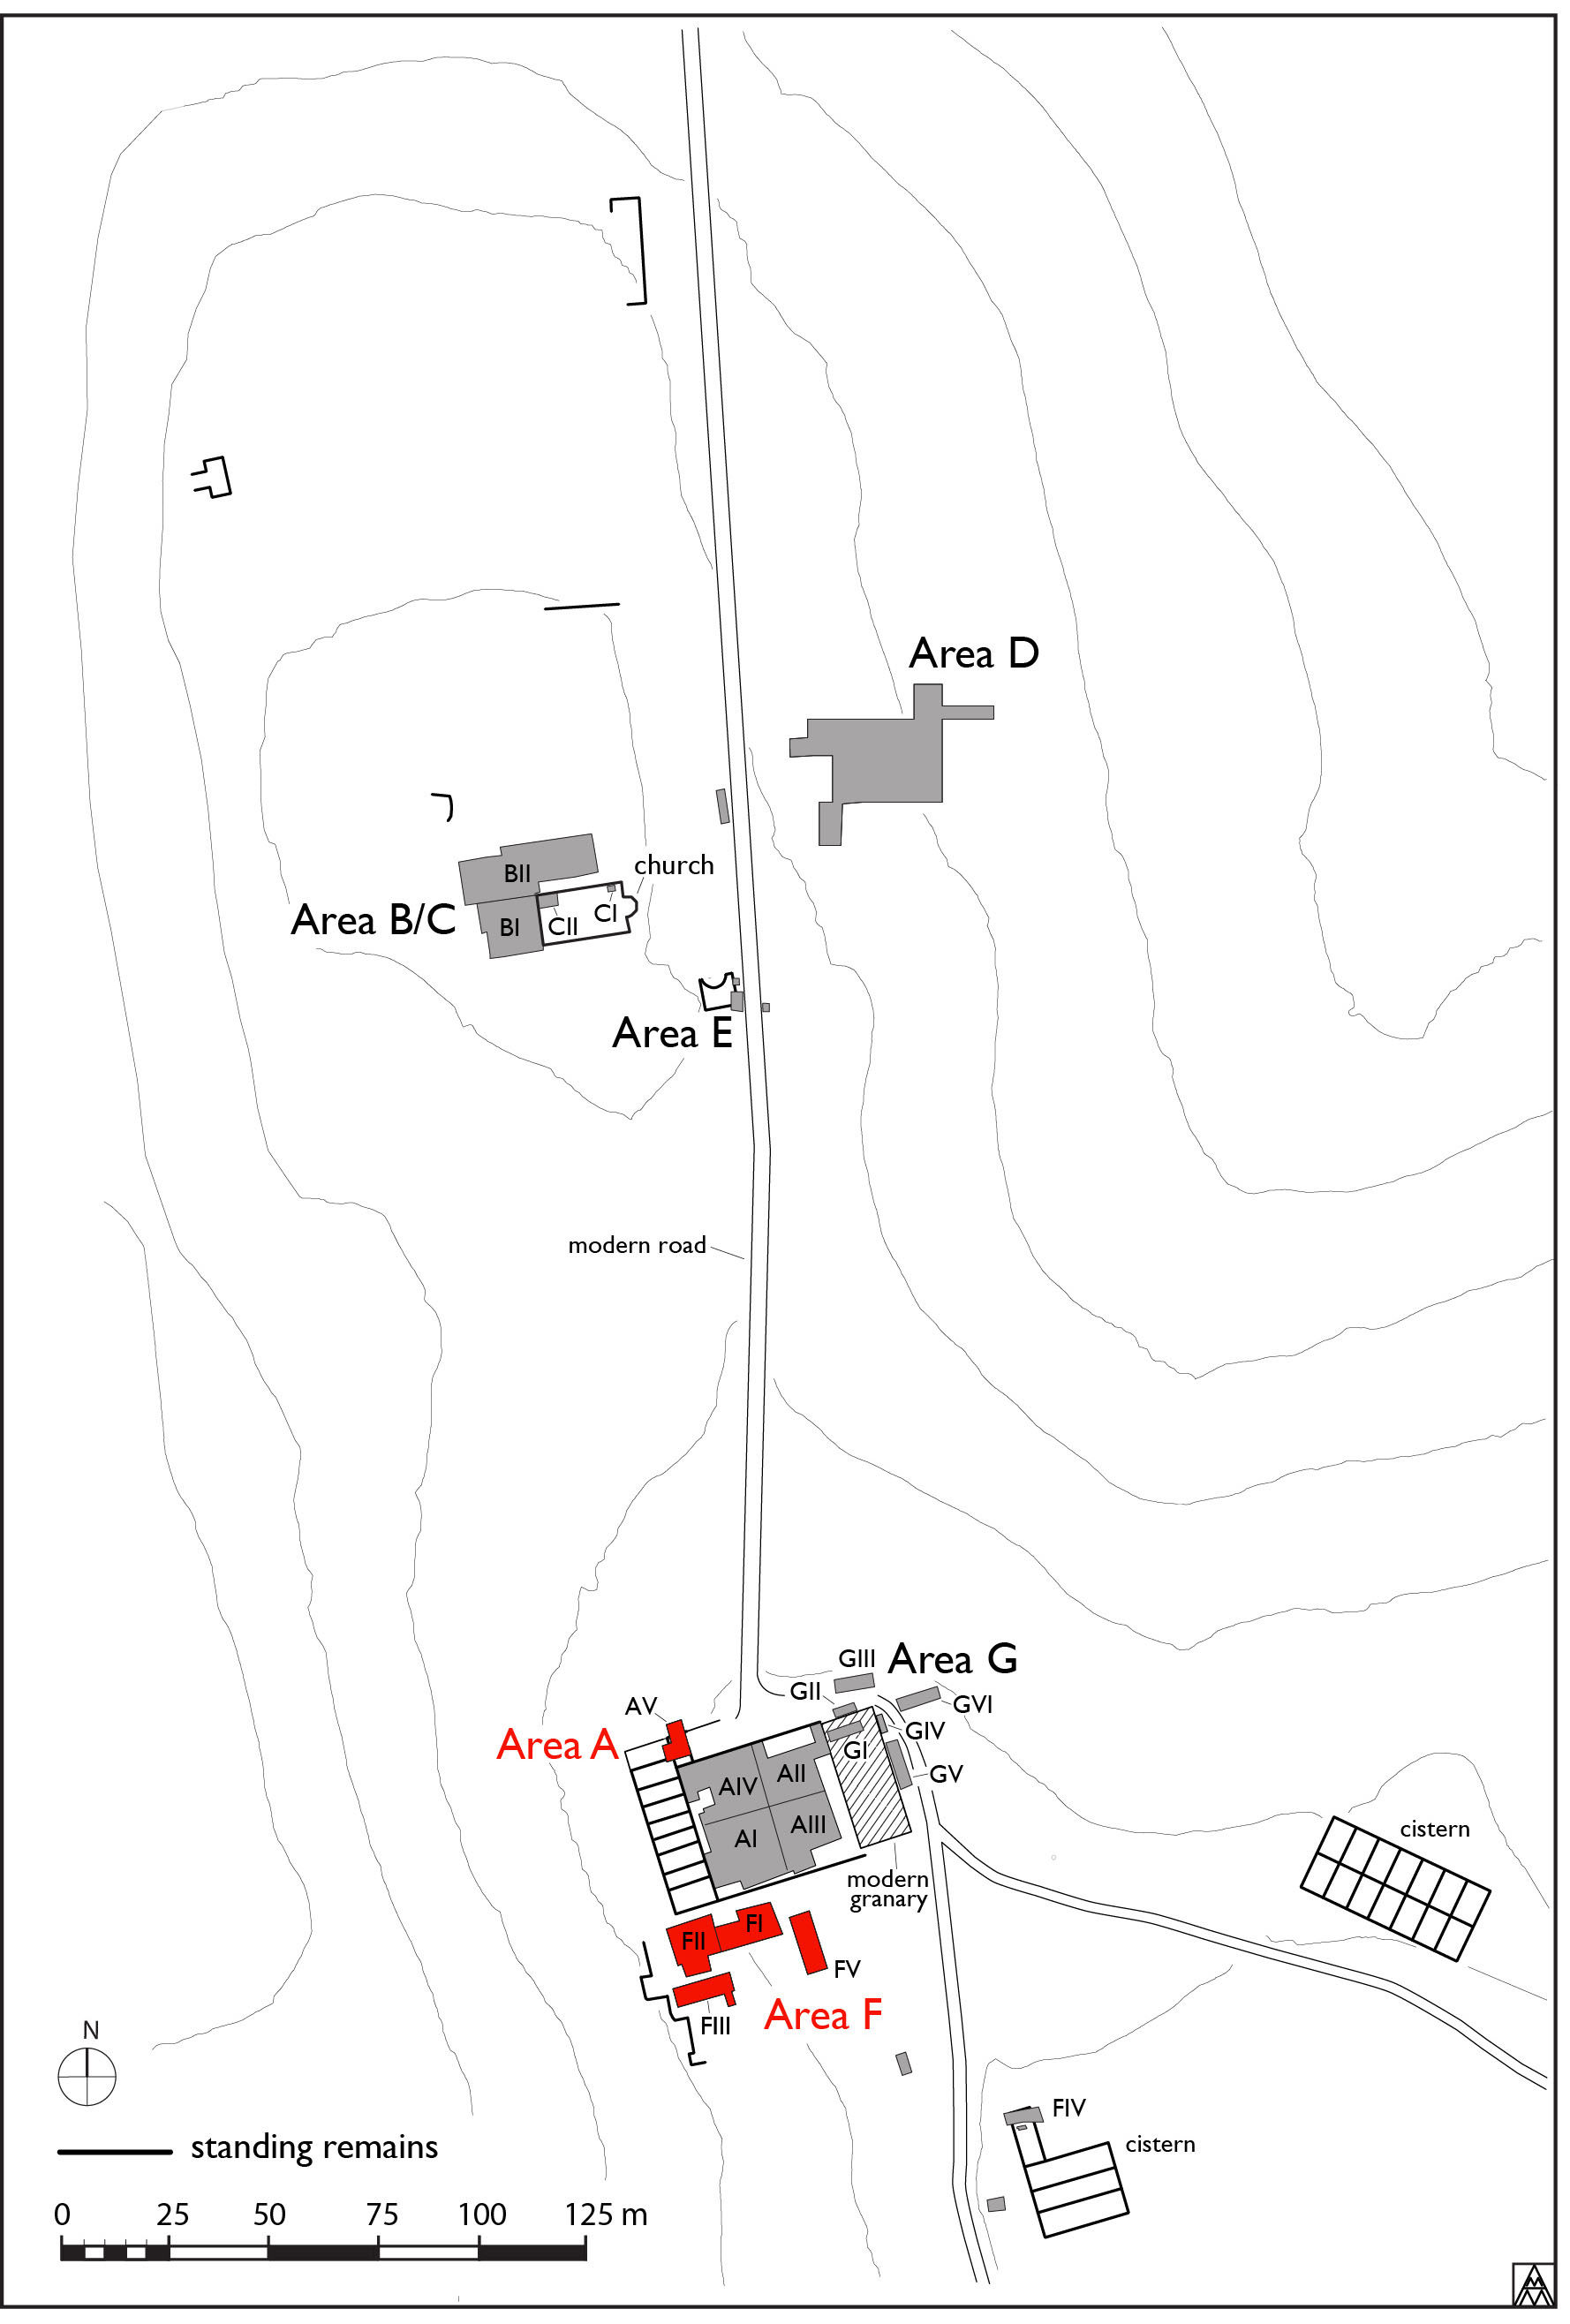 Figure 1. General site plan showing location of Areas A and F (Margaret Andrews).